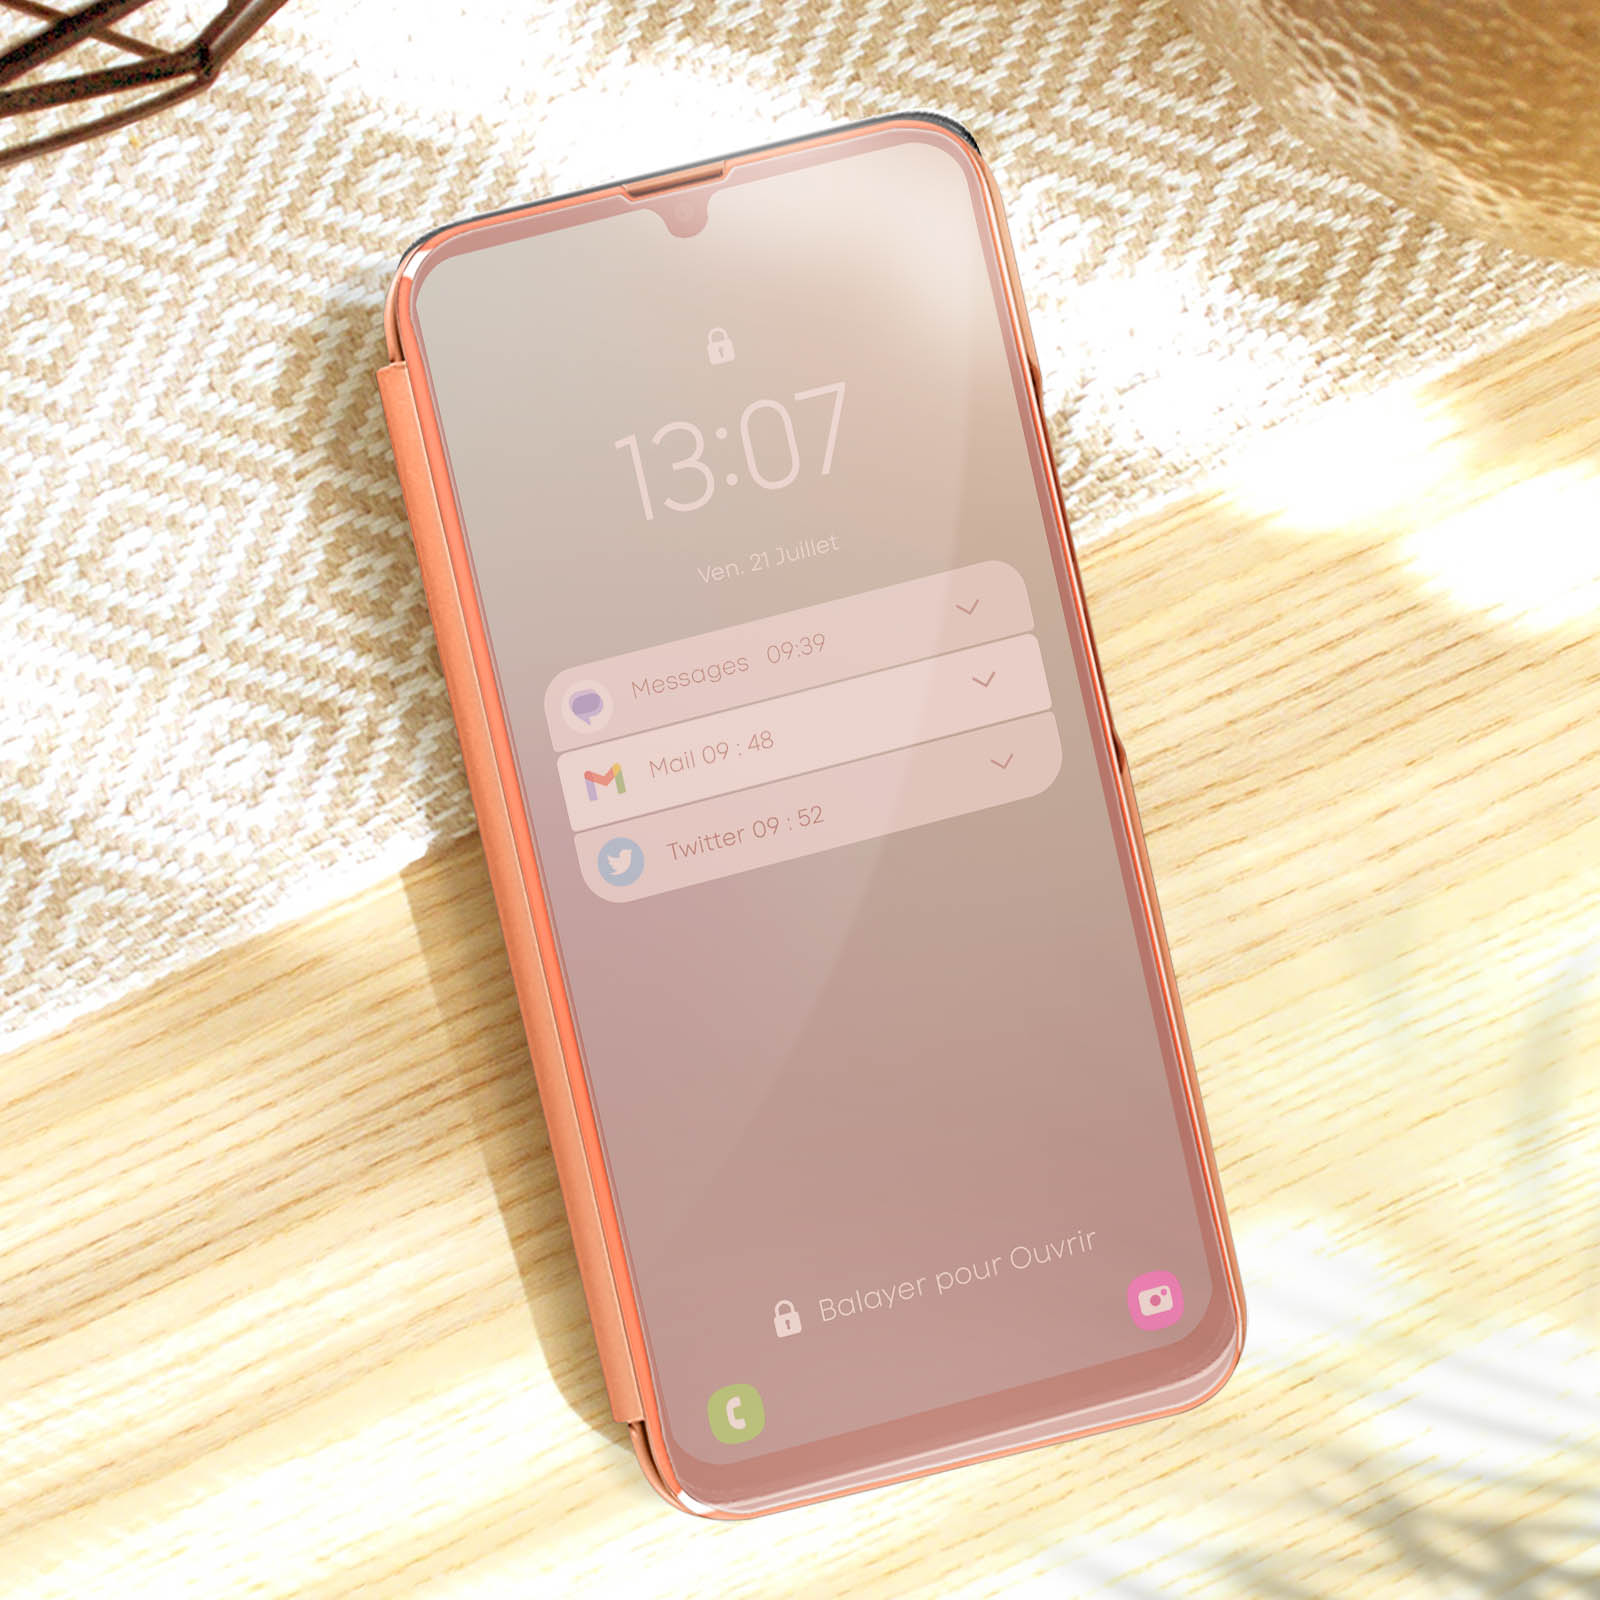 Series, AVIZAR A34 Standing Samsung, Rosegold Cover Bookcover, Clear View Galaxy 5G,